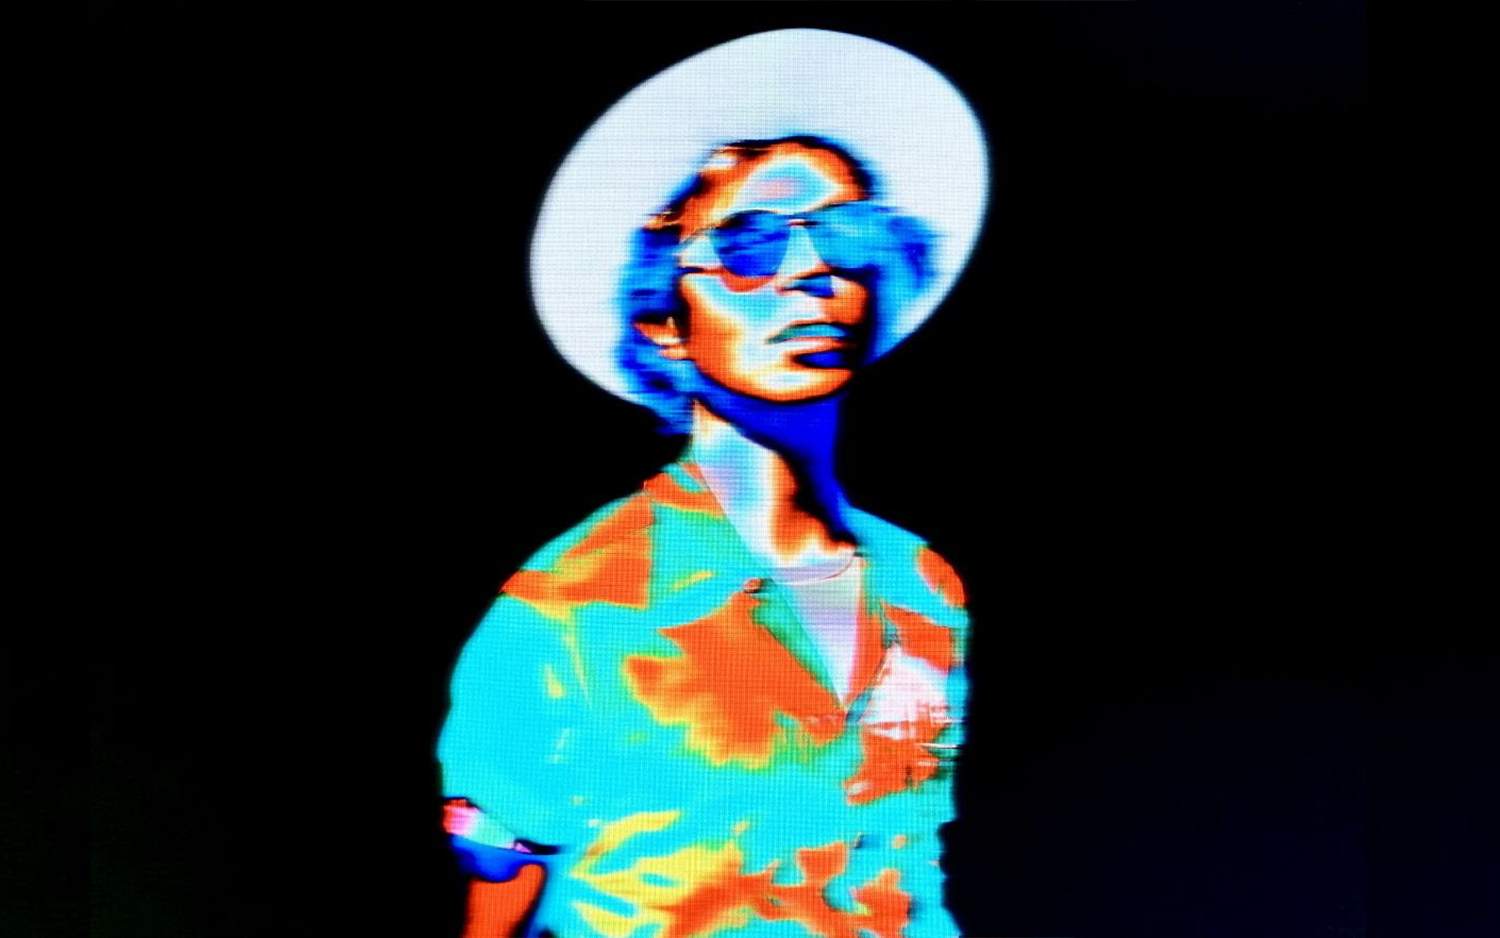 Beck teams up with NASA and AI for ‘Hyperspace’ visual album journey